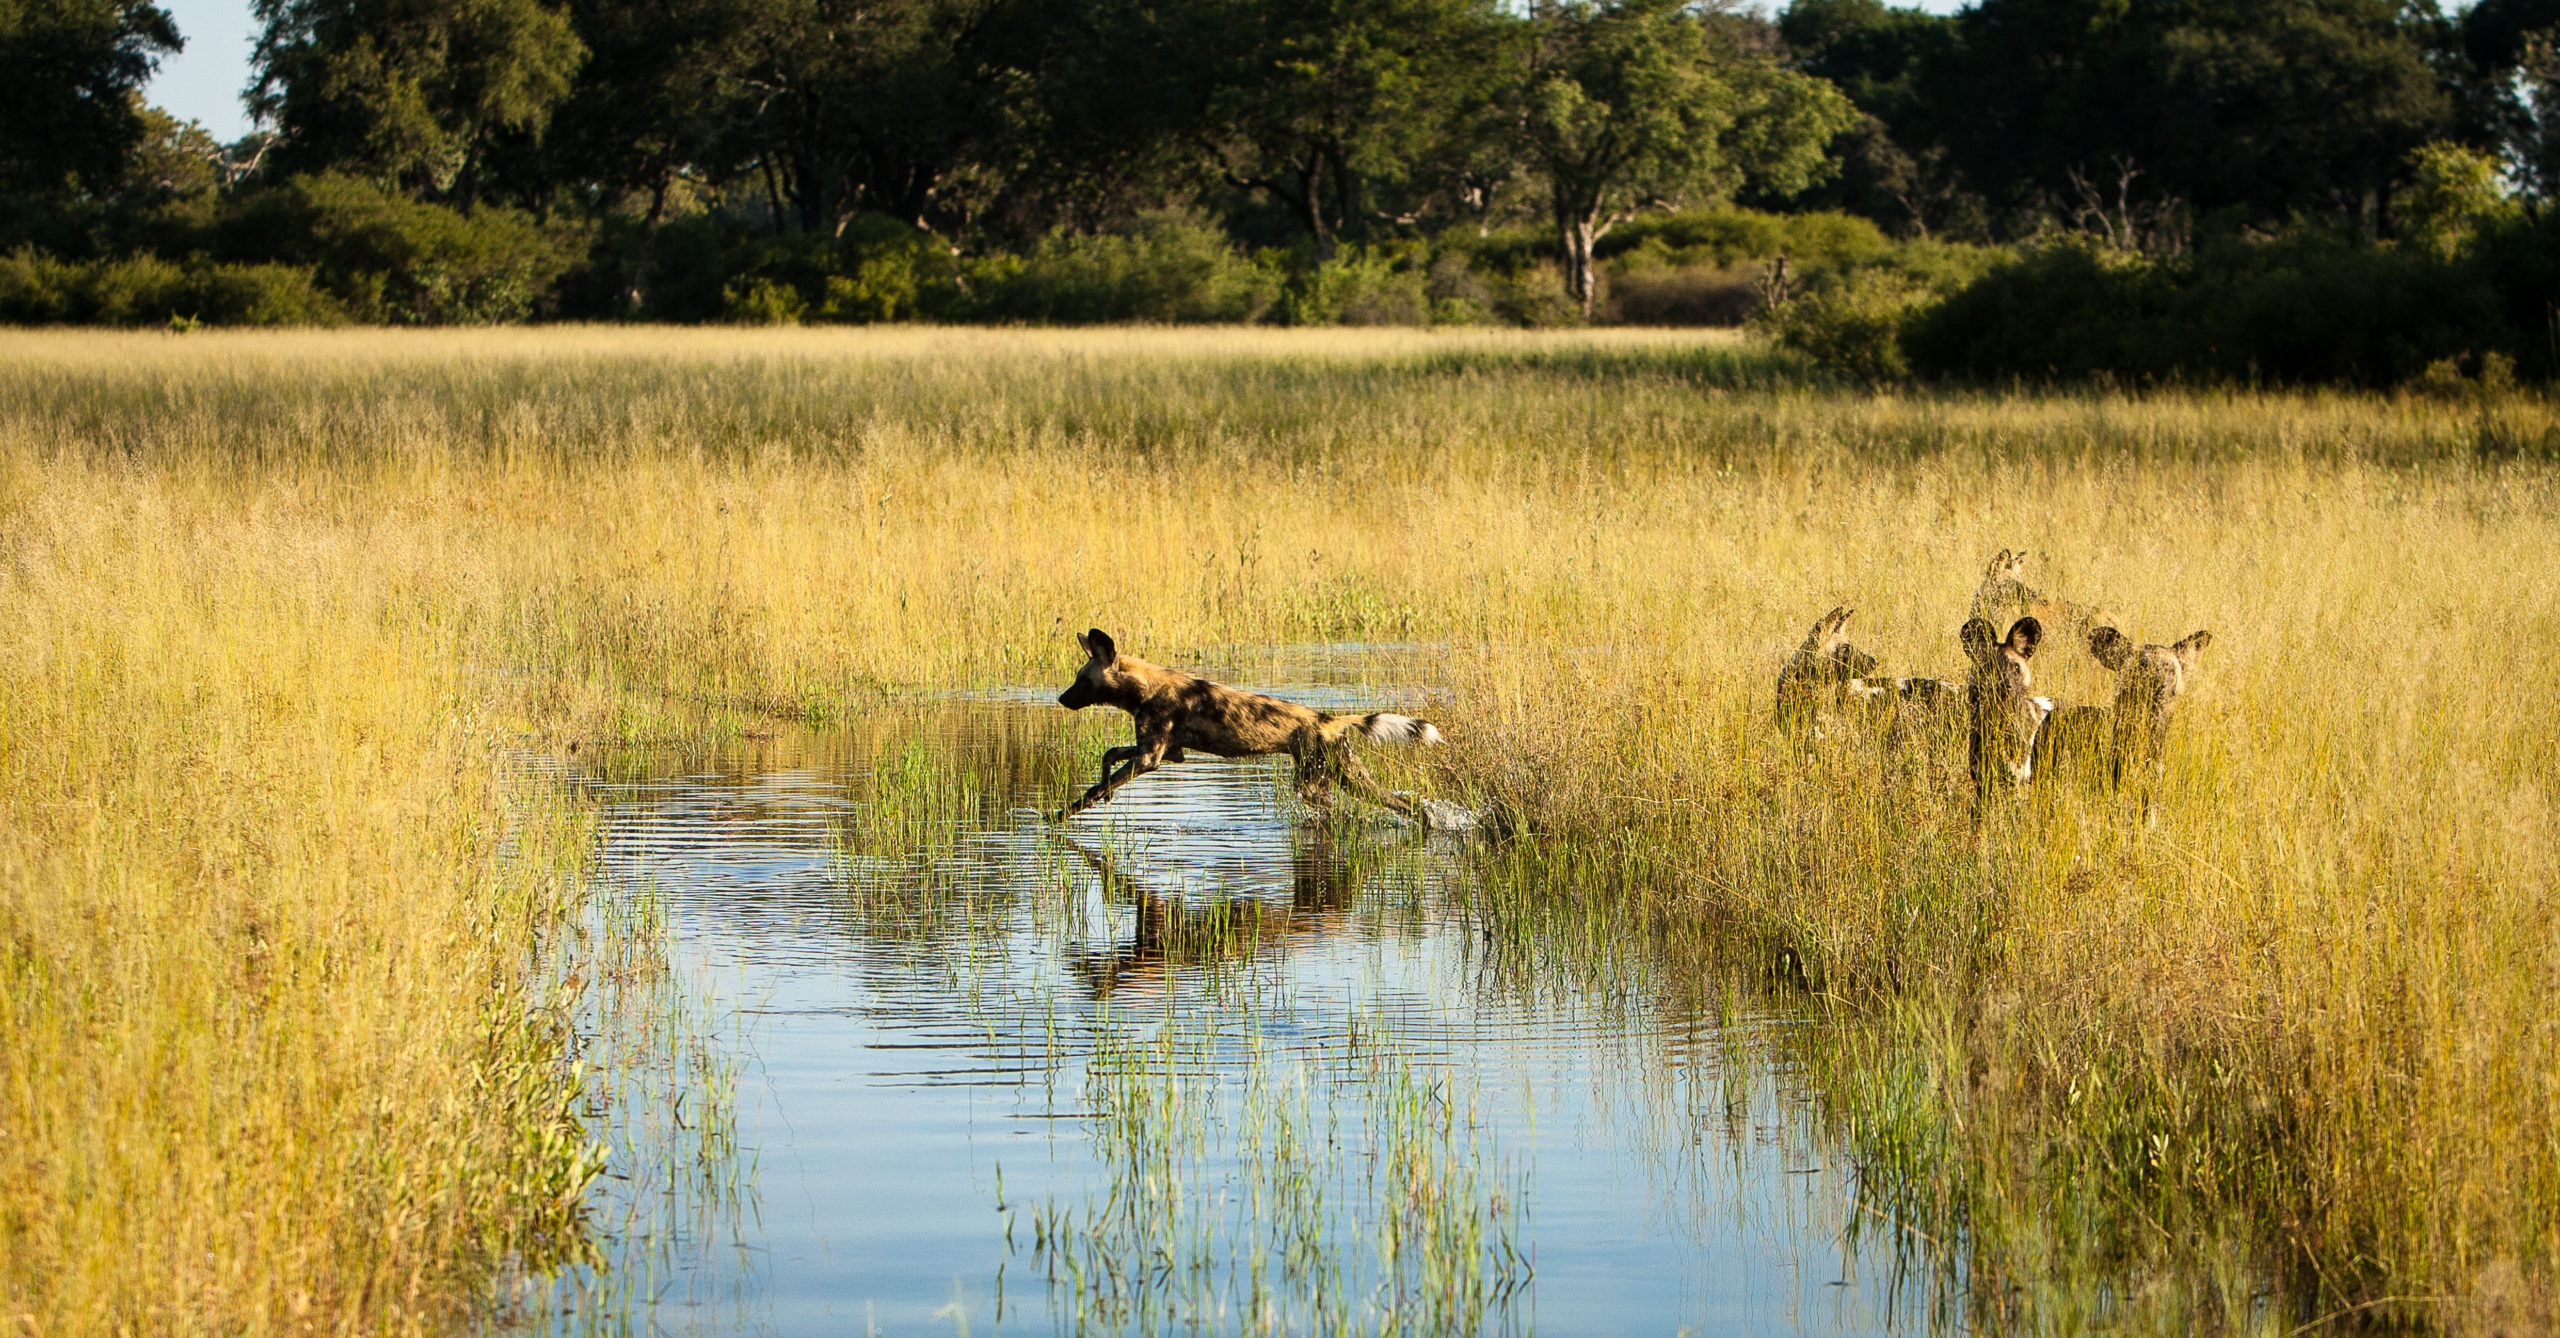 Witness extraordinary Botswana creatures like these wild dog when you take a tailor-made holiday with Alfred&.